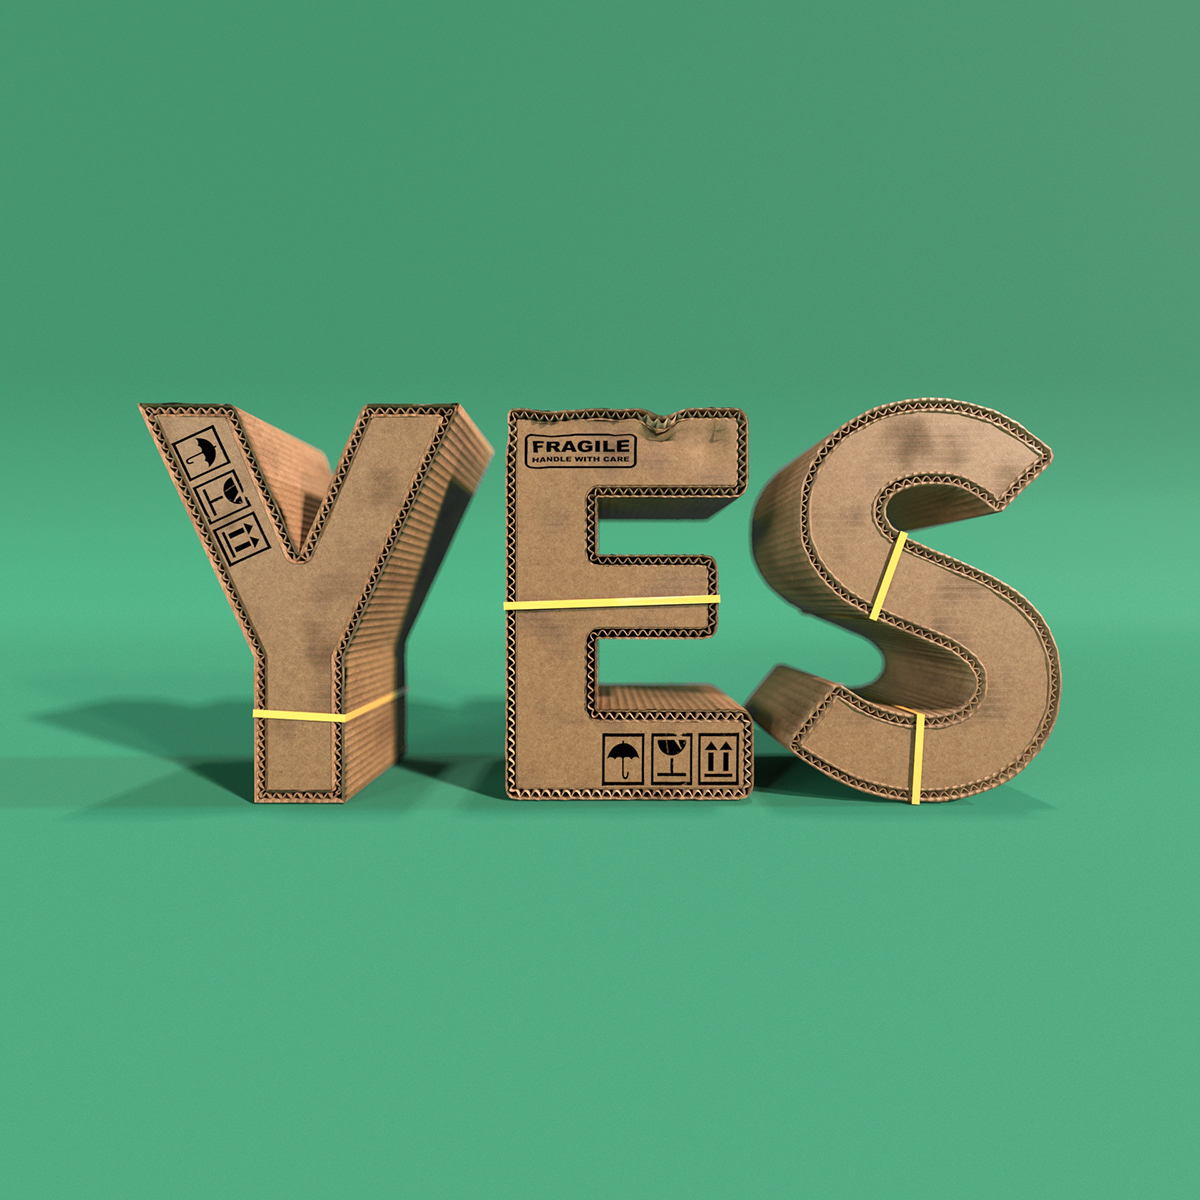 Shipping 3D Typography